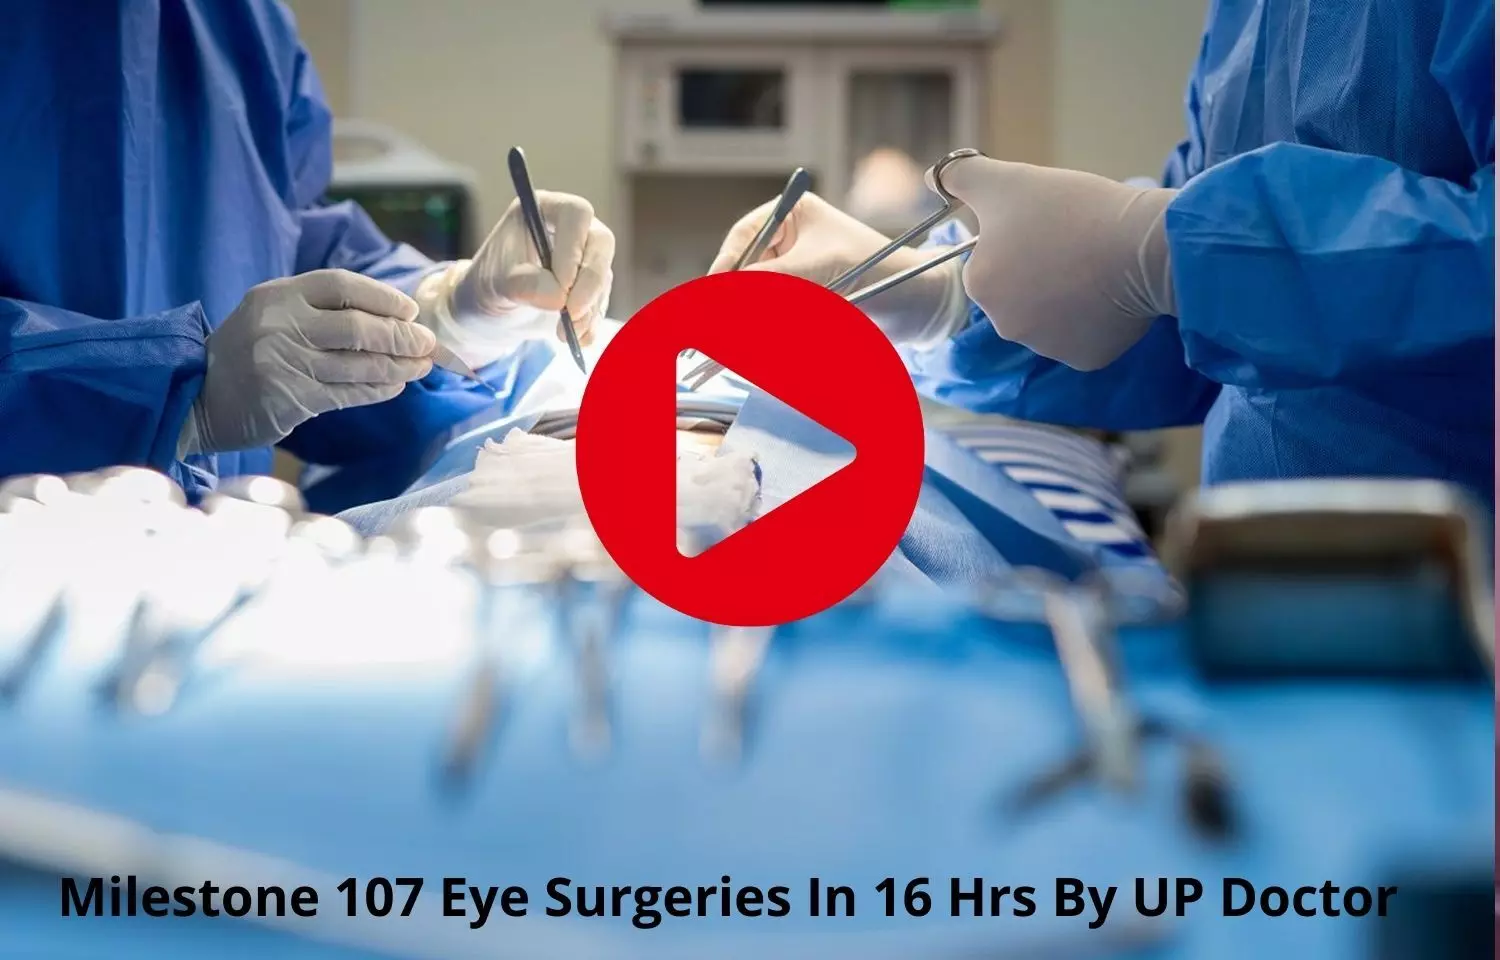 Milestone achieved 107 Eye Surgeries In 16 Hrs By UP Doctor